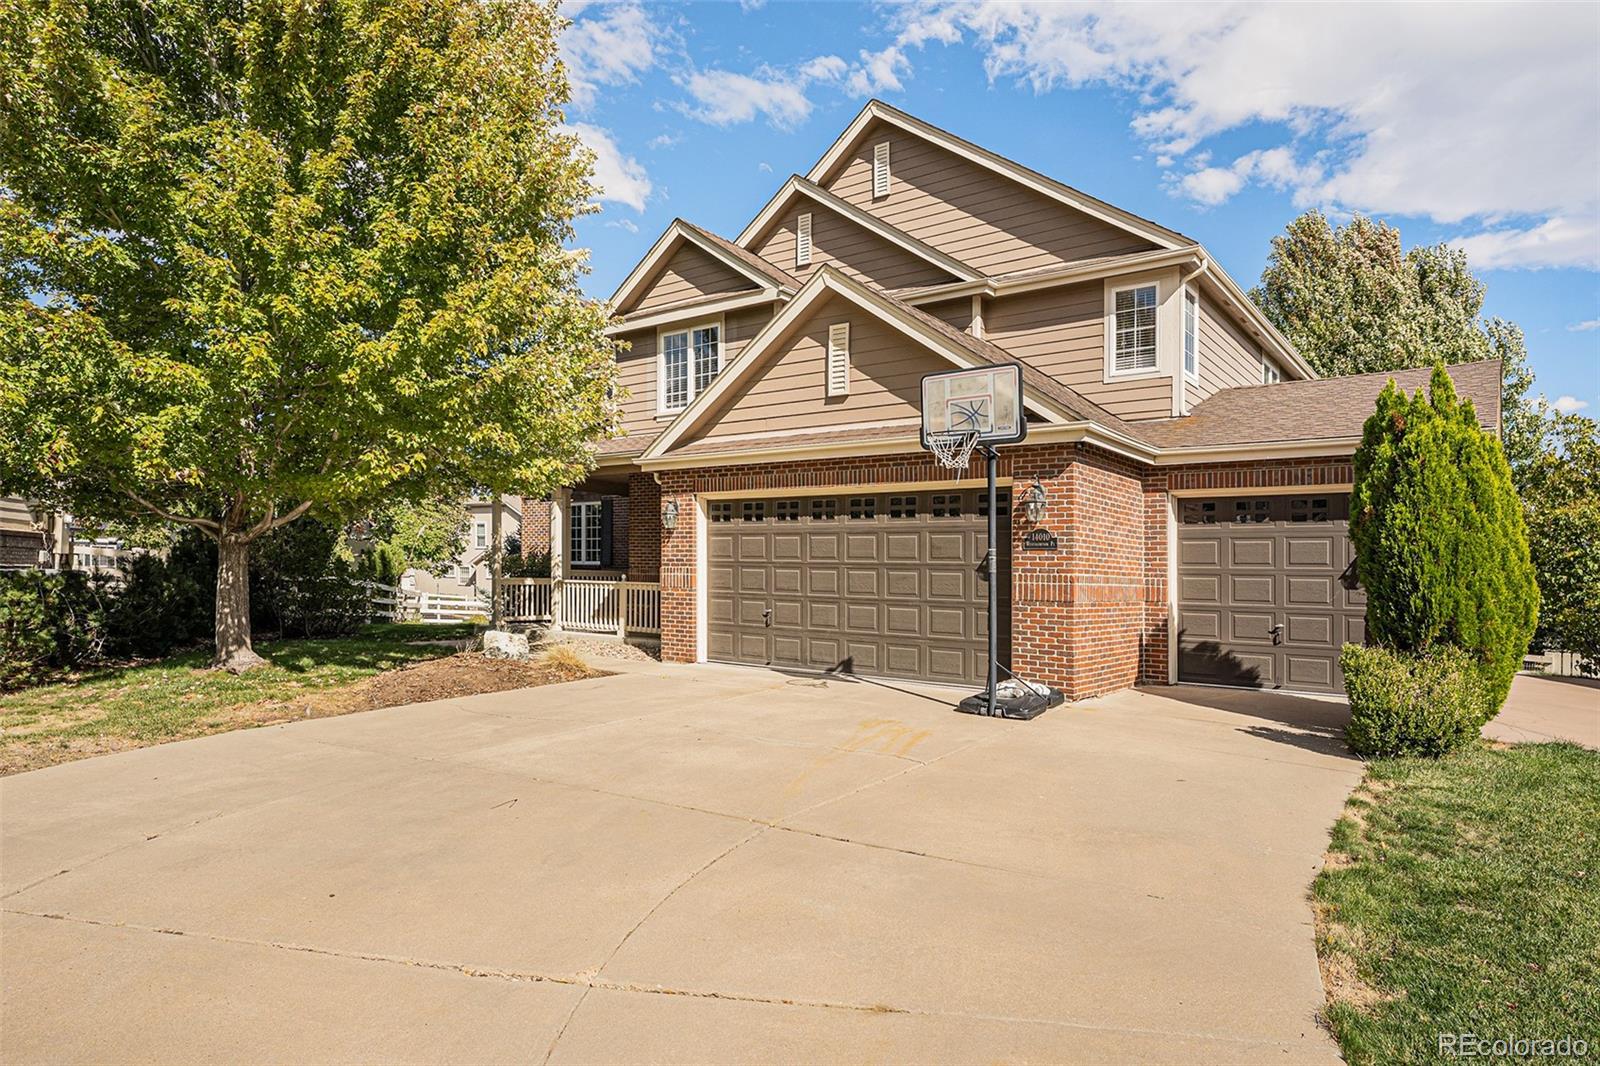 Report Image for 14010  Westhampton Point,Broomfield, Colorado